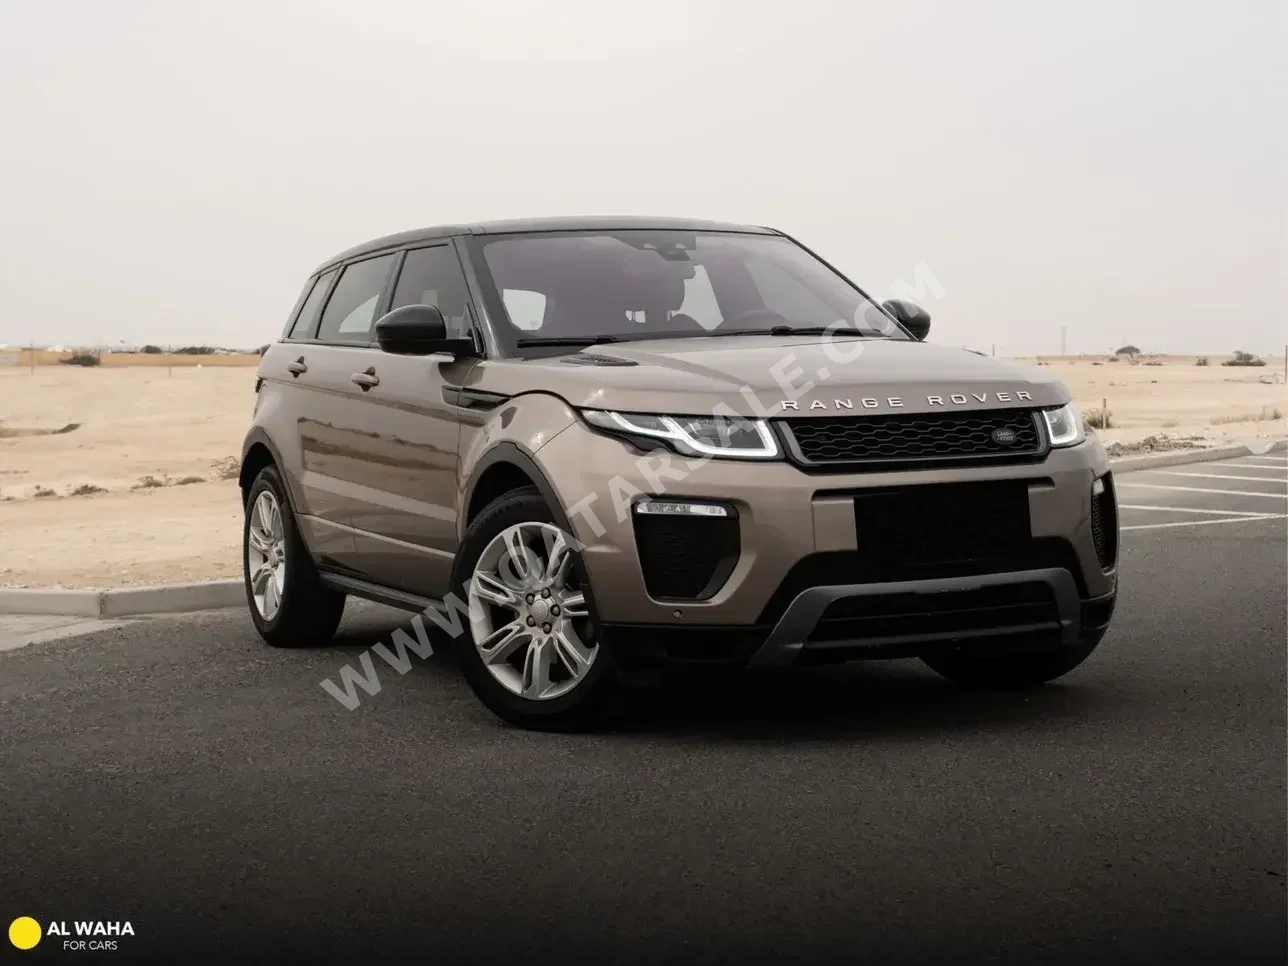 Land Rover  Evoque  2017  Automatic  109,000 Km  4 Cylinder  Four Wheel Drive (4WD)  SUV  Brown